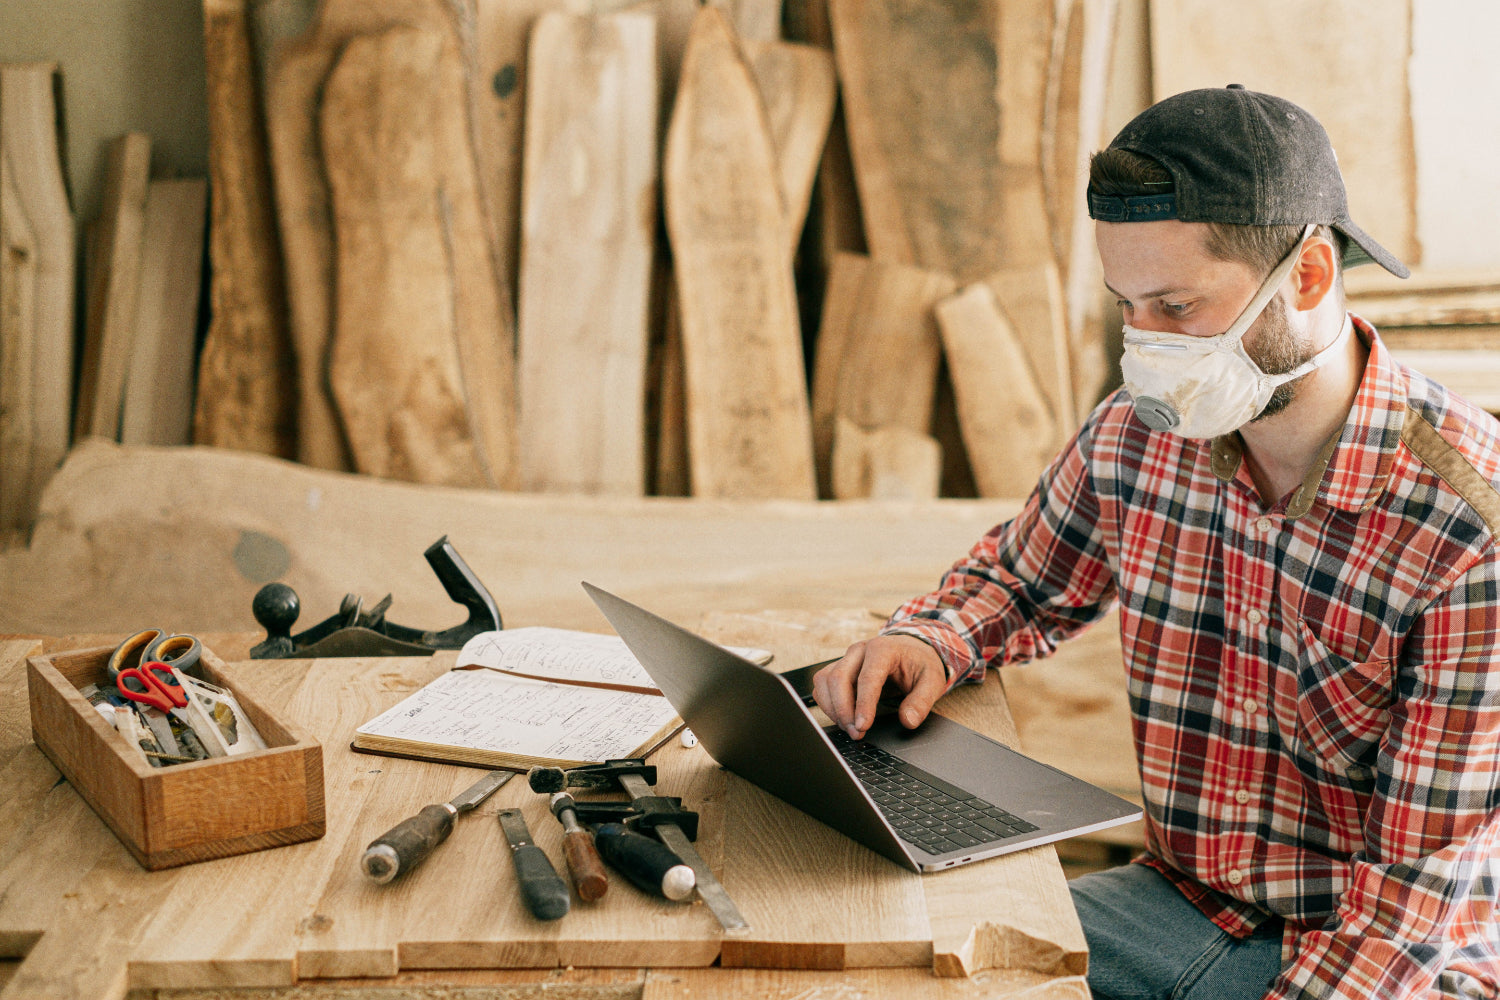 A person makes money online on their laptop in a woodworking shop setting